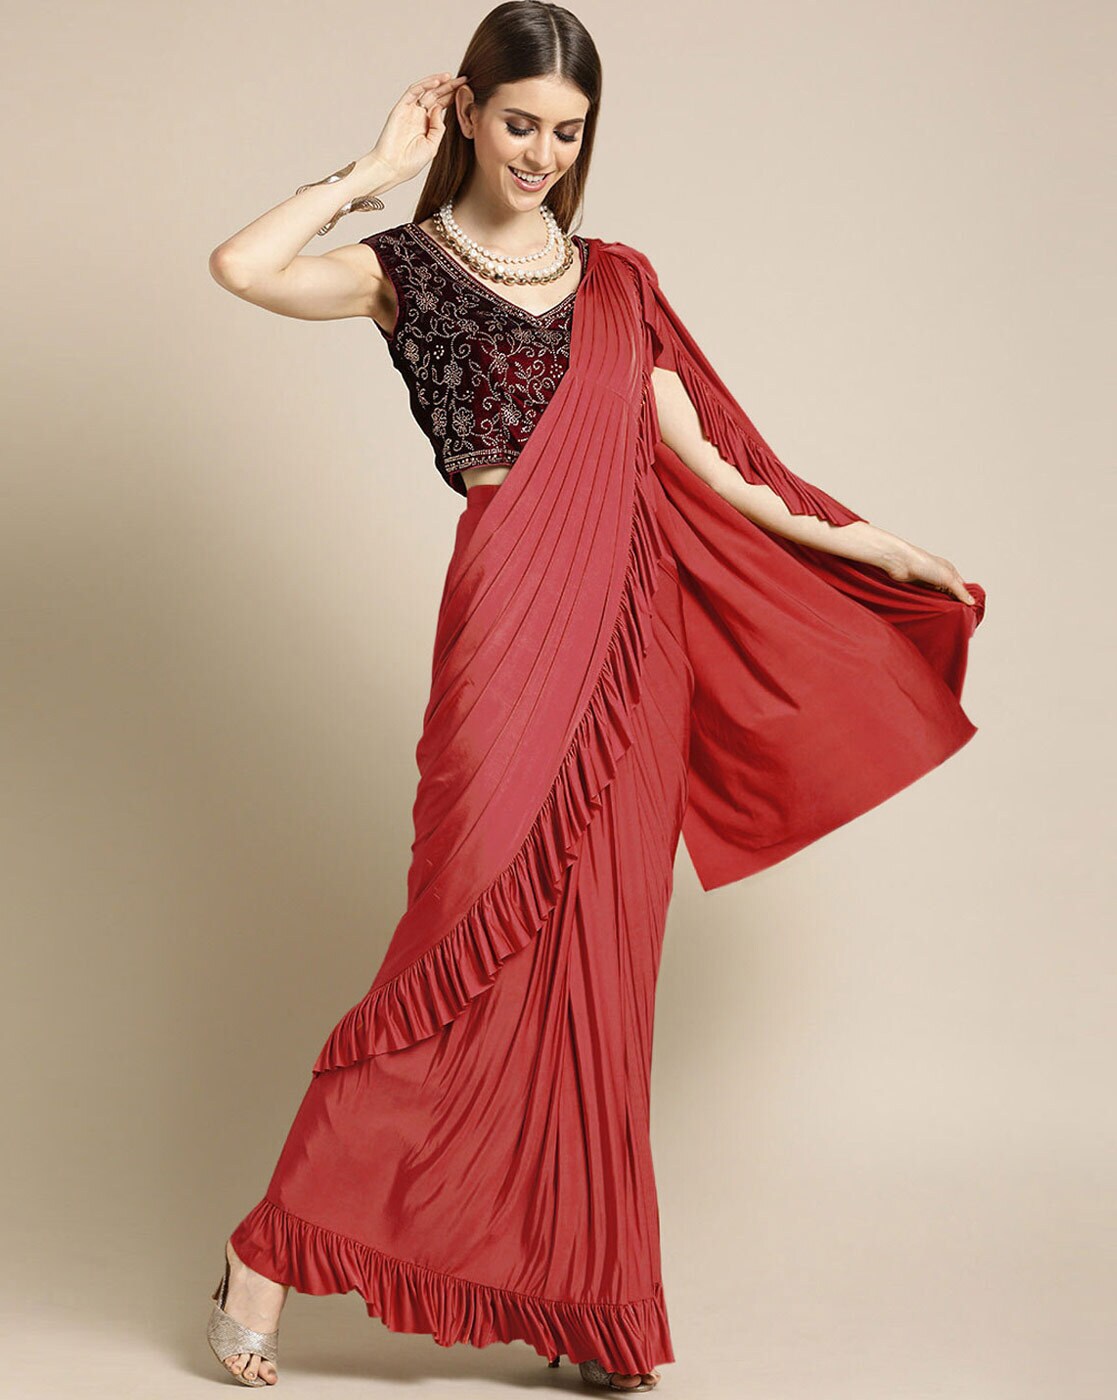 Buy Now Ready to Wear Ruffle Saree ll Online Shop ll www.prititrendz.com -  YouTube